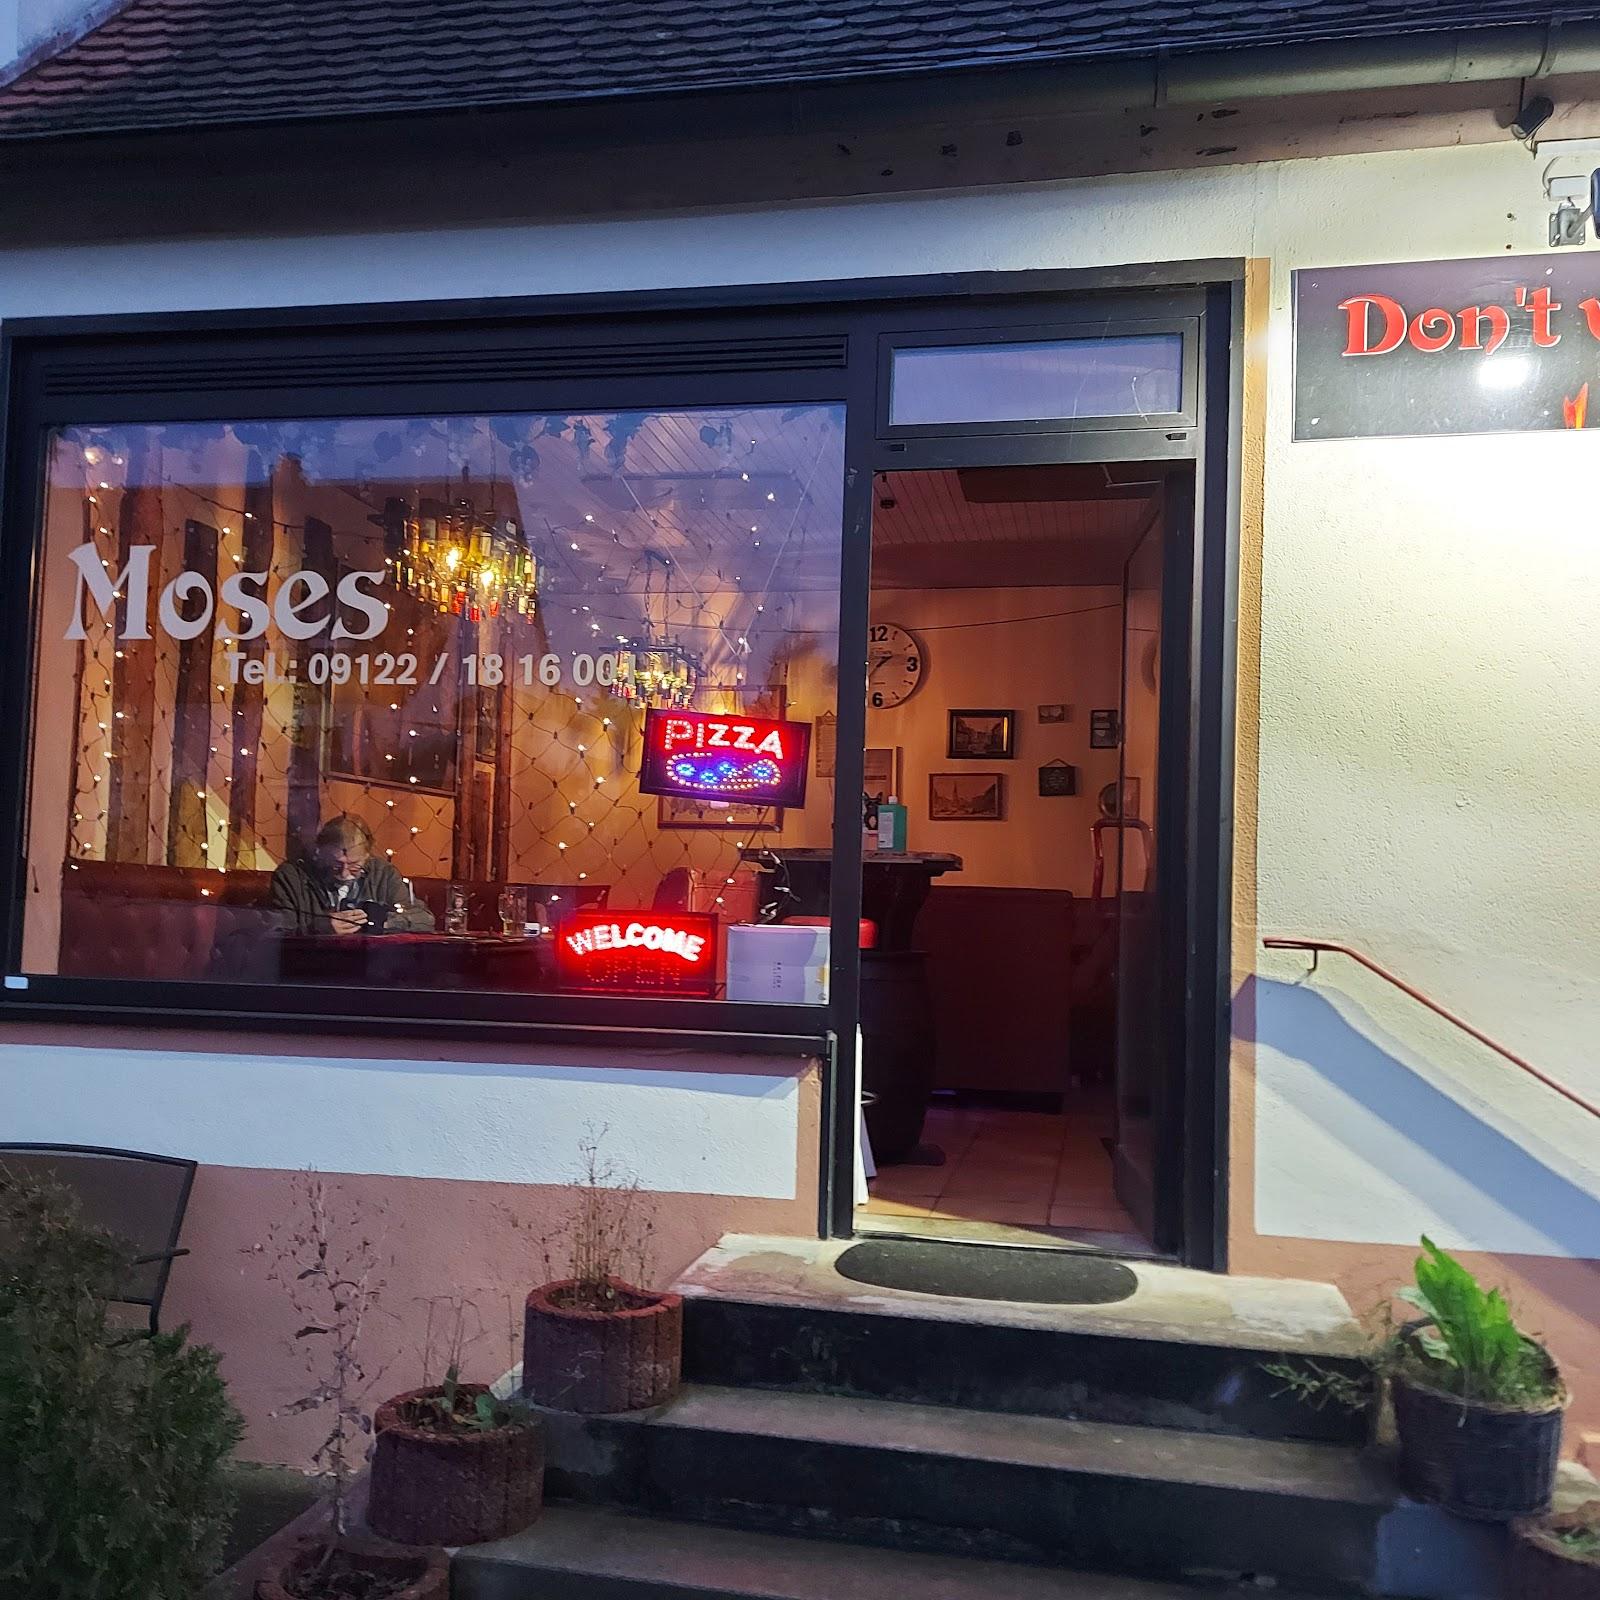 Restaurant "Moses Imbiss" in Schwabach